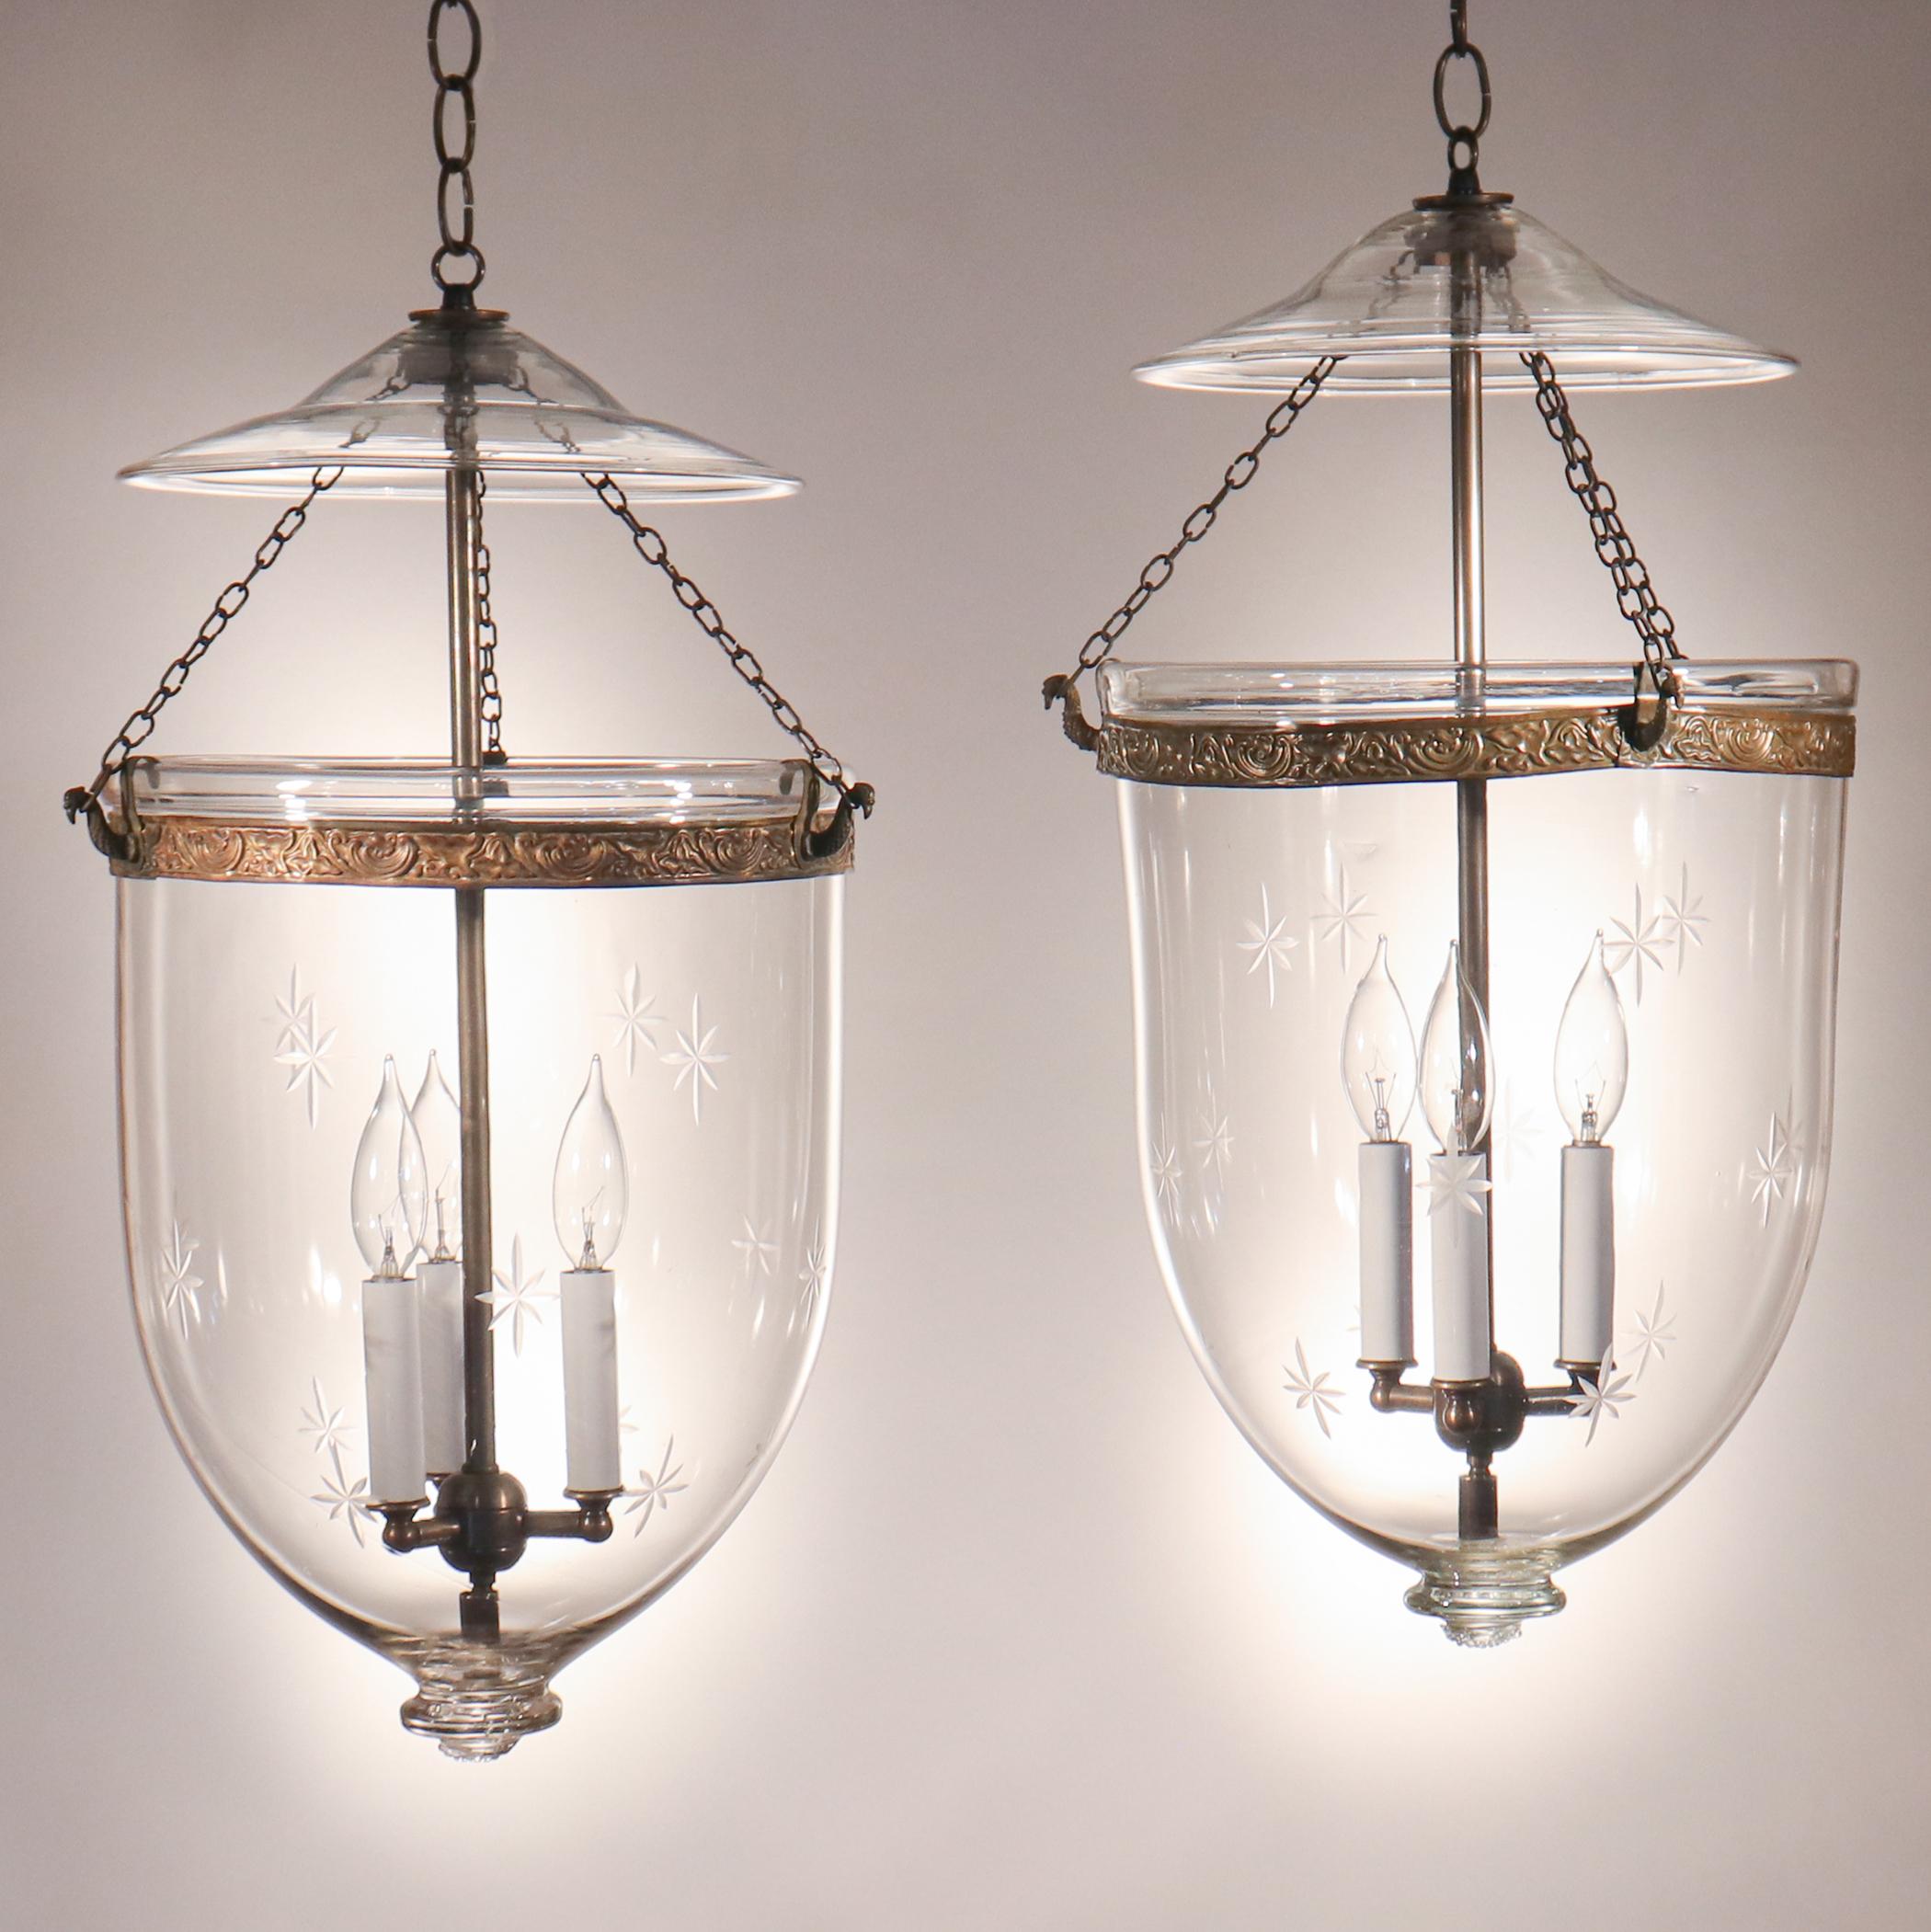 An exquisite pair of English bell jar lanterns, circa 1870, with an etched star motif and all-original brass fittings. These well-matched pendants feature excellent quality hand blown glass, replete with desirable swirls and air bubbles. The